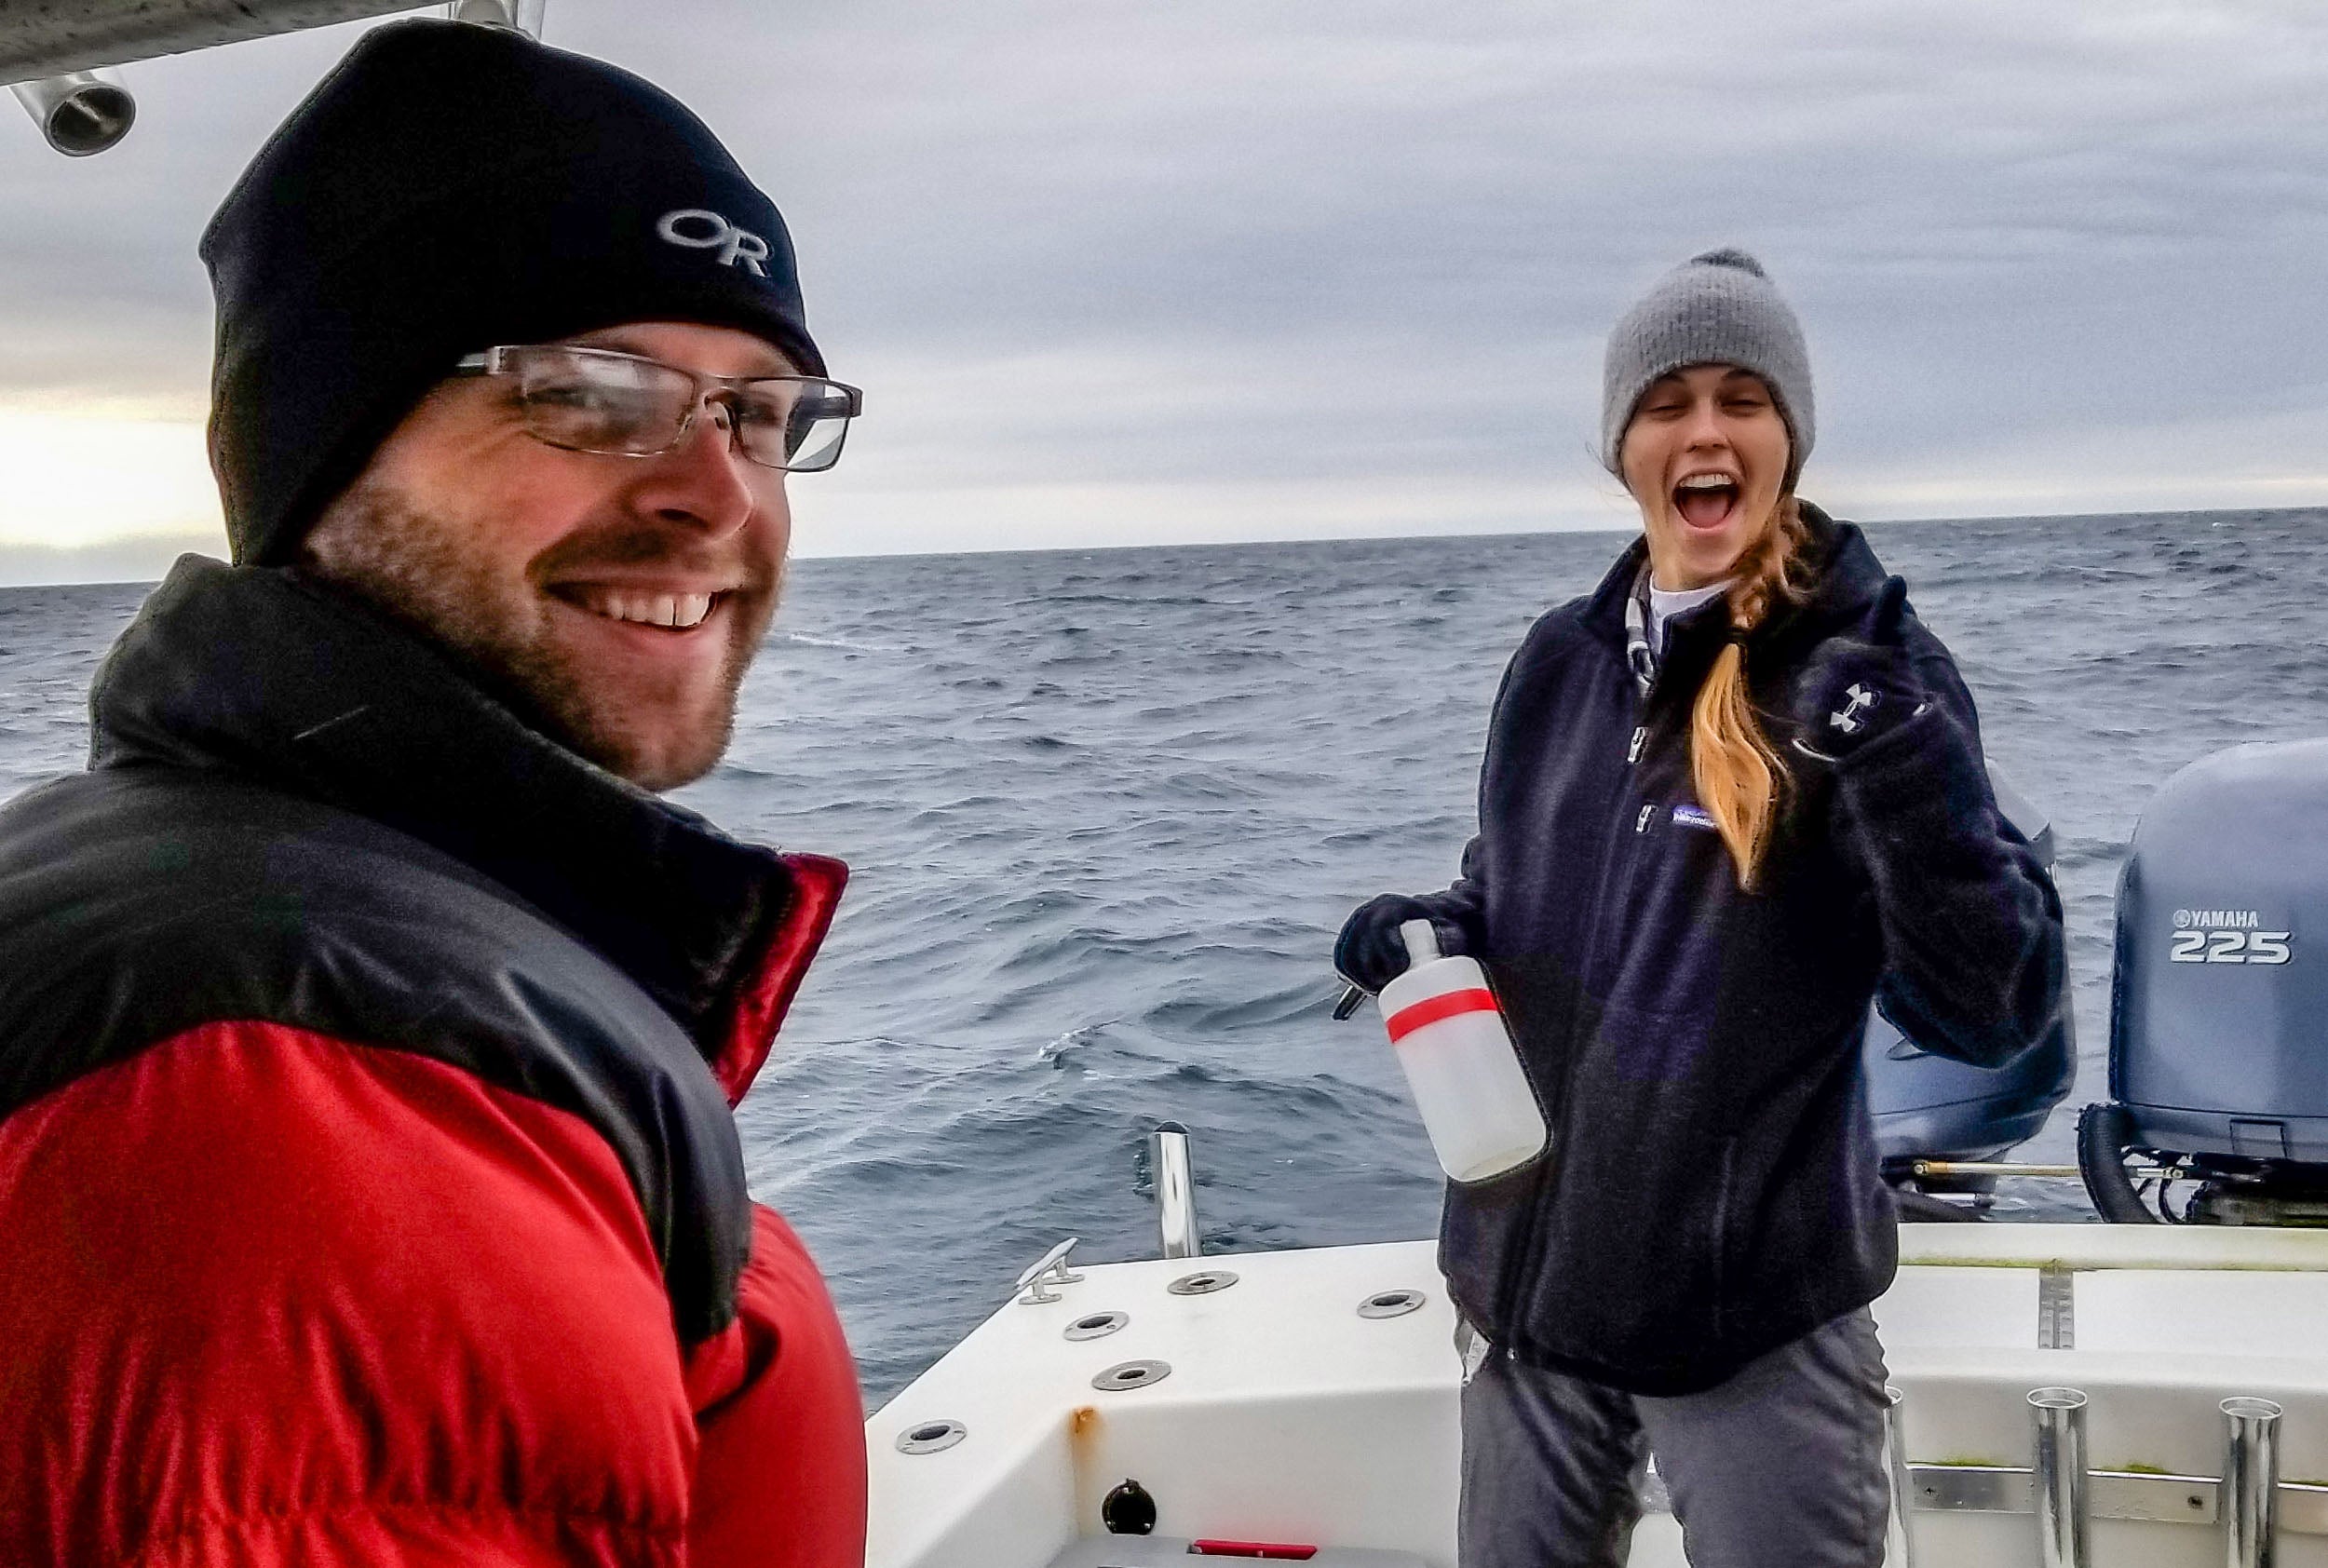 Graduate student Taylor Miller (left), Mitra’s student researcher, and Liz Mason (right), Corbett’s technician, give a thumbs up as they assist Mitra’s team in examining the sediment entering the Pamlico Sound after Hurricane Florence.